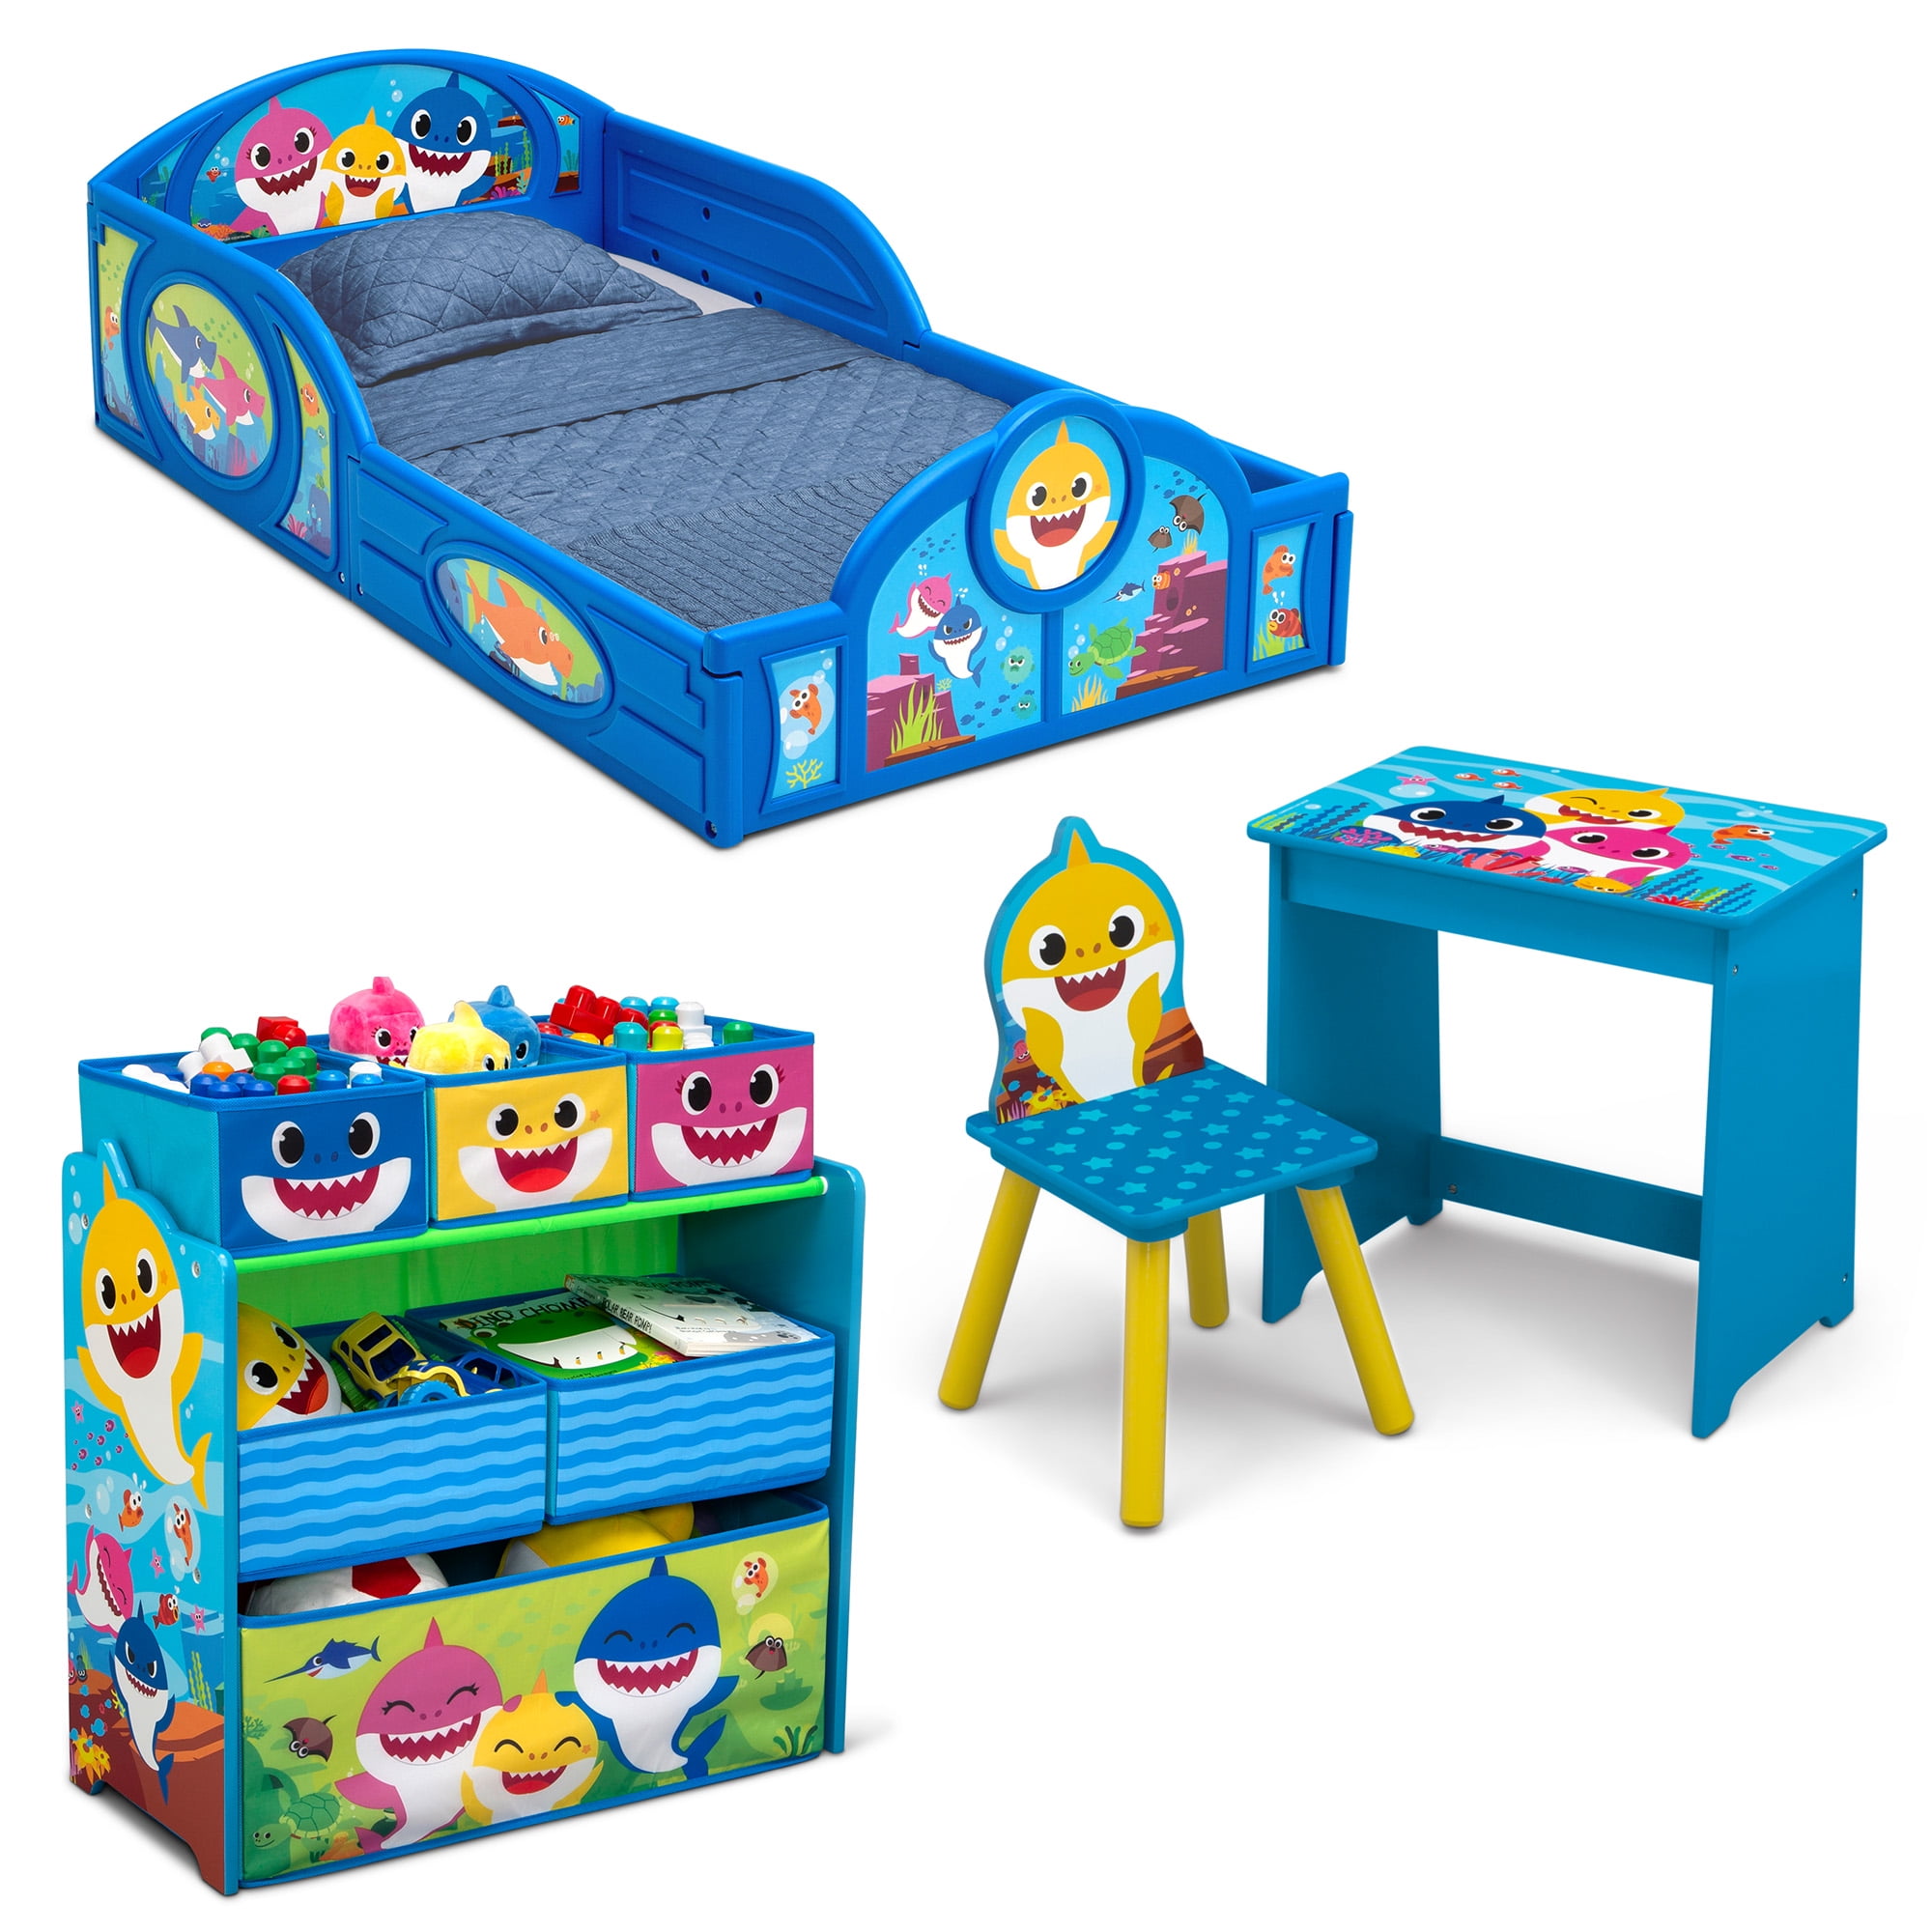 Baby Shark 4-Piece Room-in-a-Box Bedroom Set by Delta Children - Includes  Sleep & Play Toddler Bed, 6 Bin Design & Store Toy Organizer and Art Desk  with Chair - Walmart.com